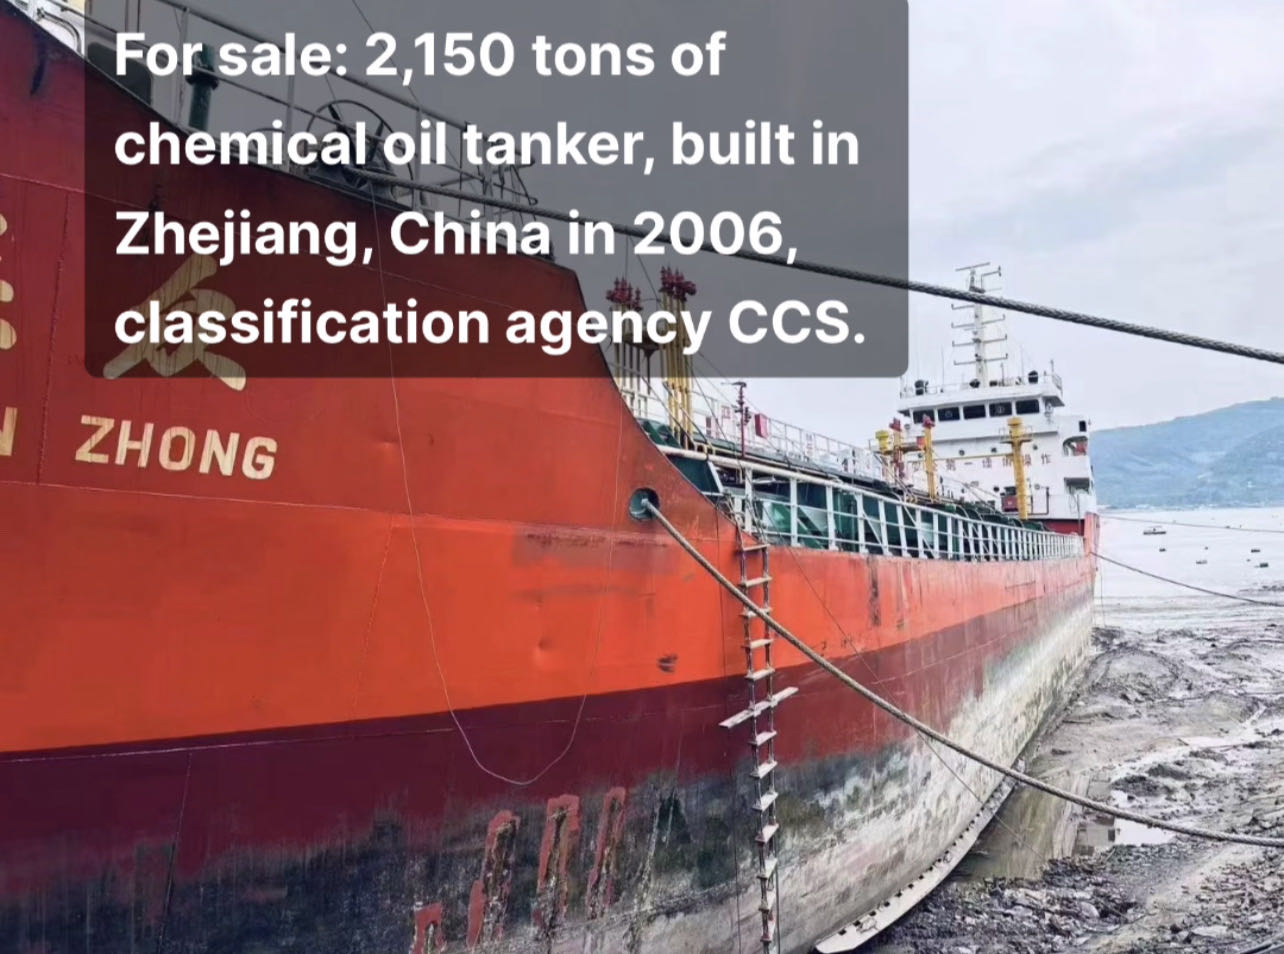 For sale: 2,150 tons of chemical oil tanker, built in Zhejiang, China in 2006, classification agency